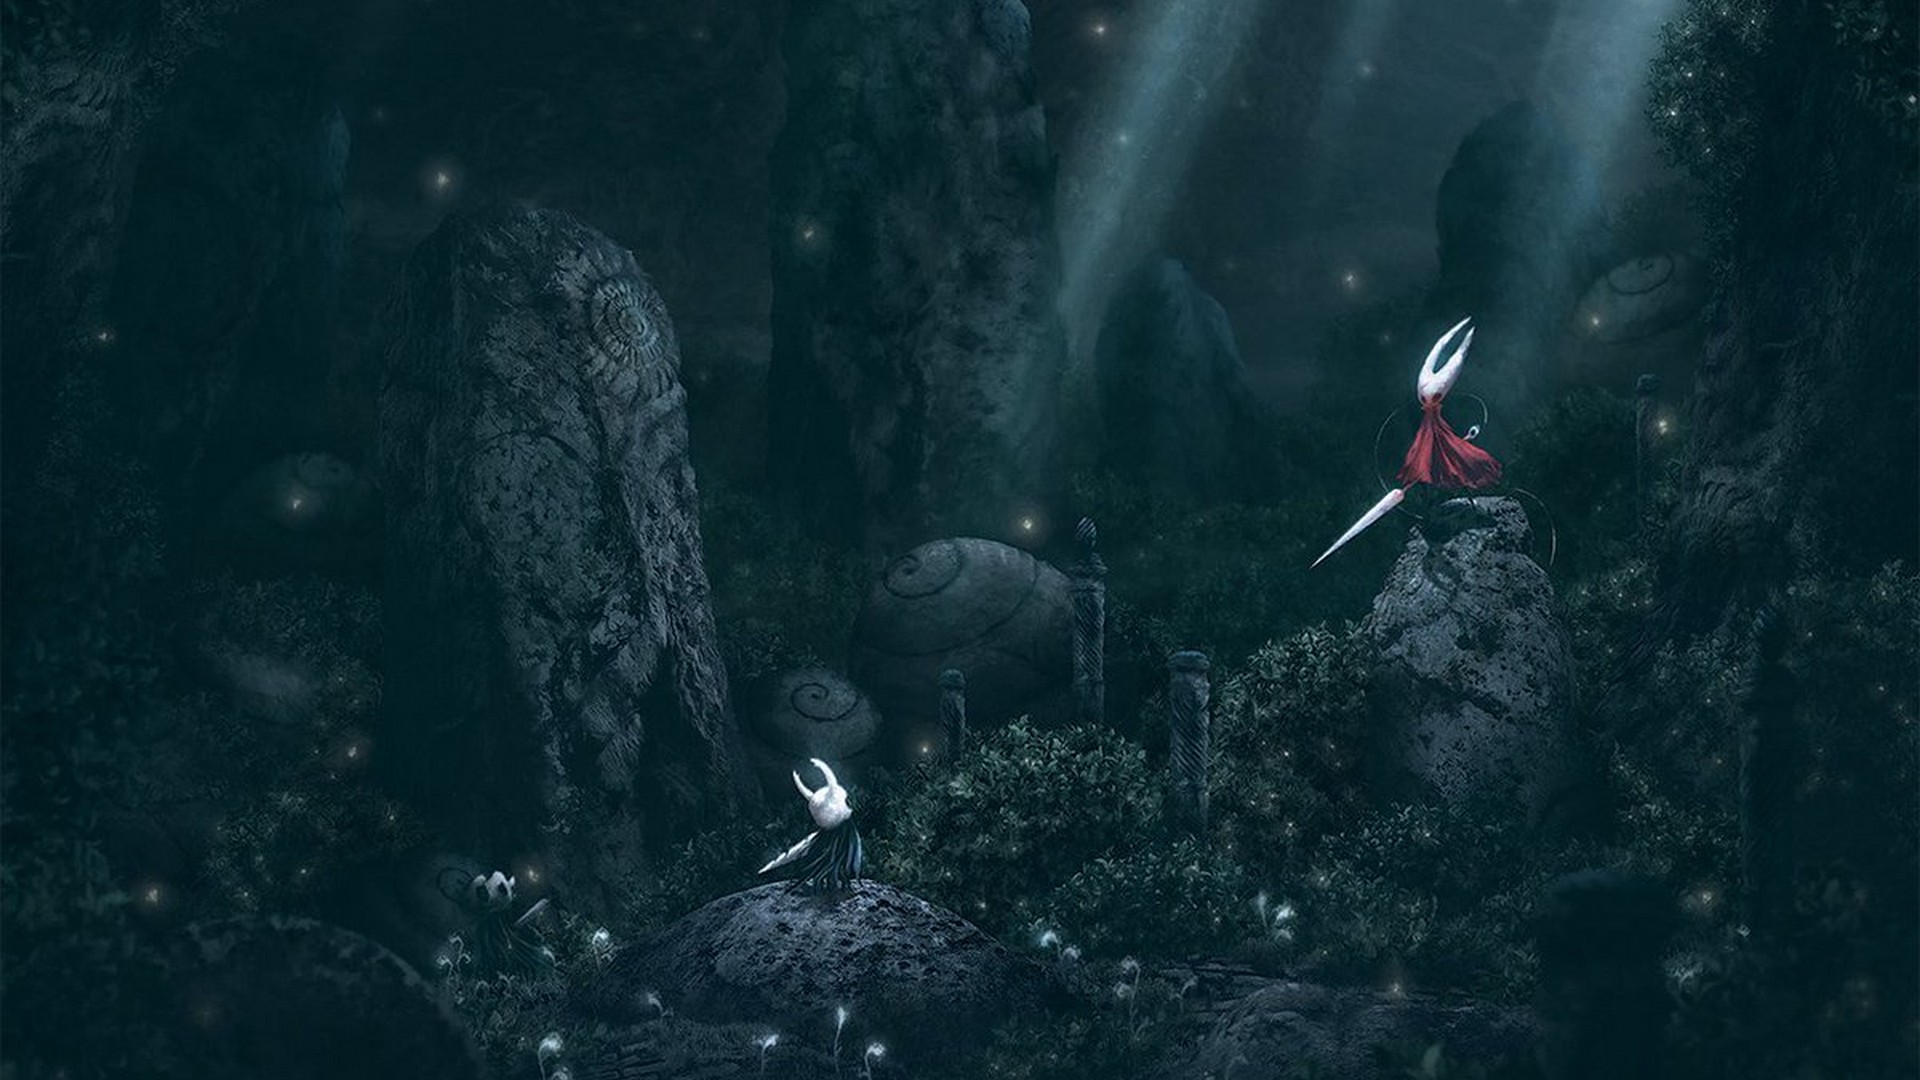 Computer Wallpapers Hollow Knight Gameplay with high-resolution 1920x1080 pixel. You can use this wallpaper for your Windows and Mac OS computers as well as your Android and iPhone smartphones